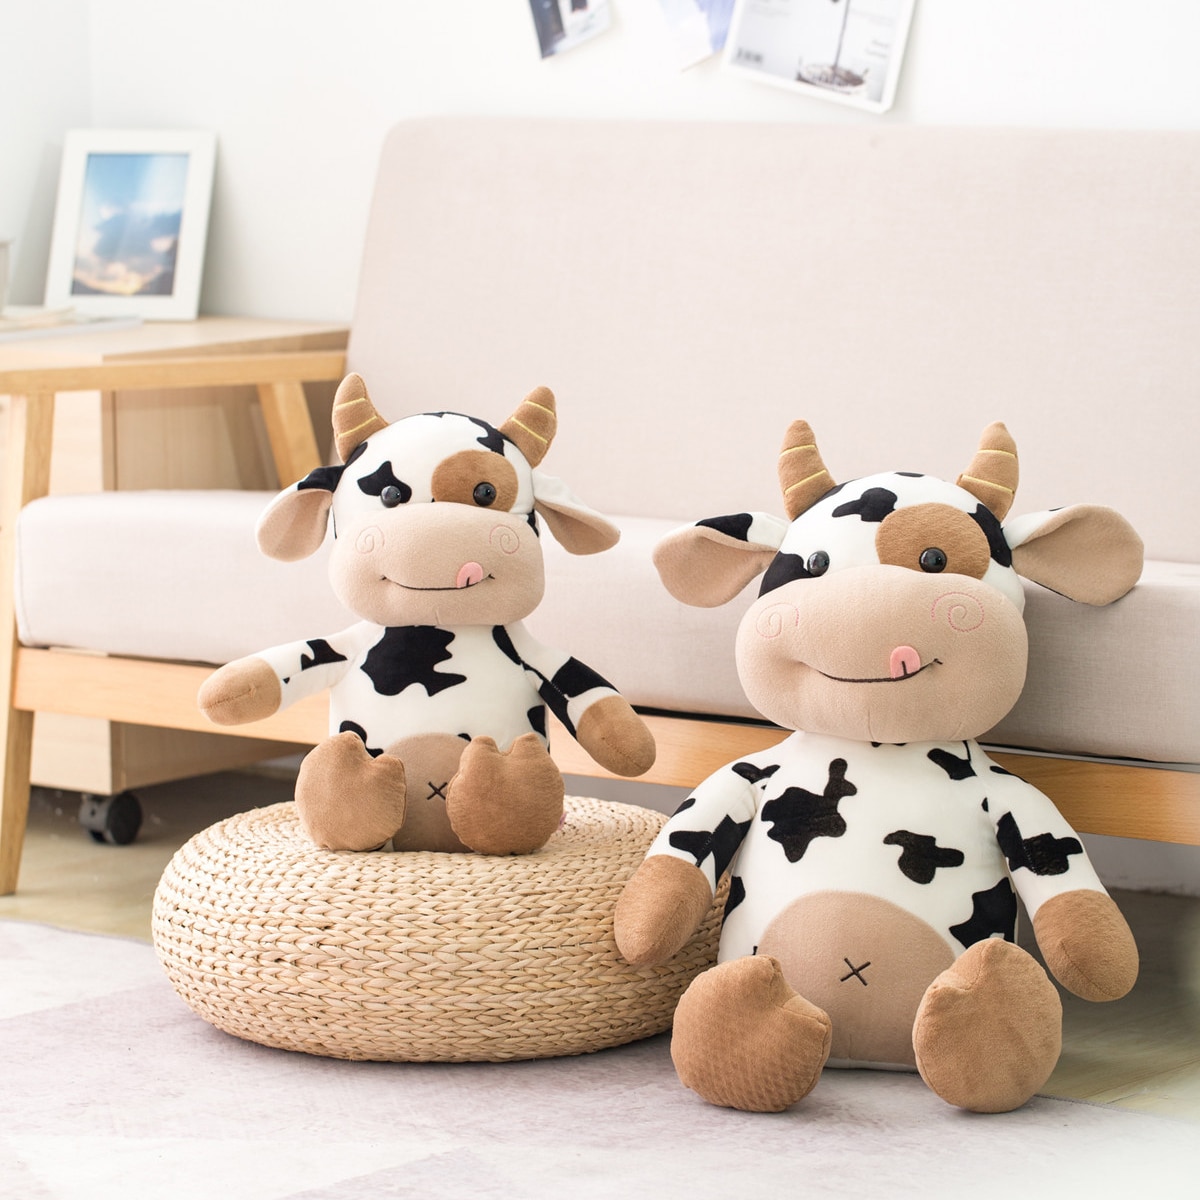 2020 New Plush Cow Toy Cute Cattle Plush Stuffed Animals Cattle Soft Doll Kids Toys Birthday 1 - The Cow Print